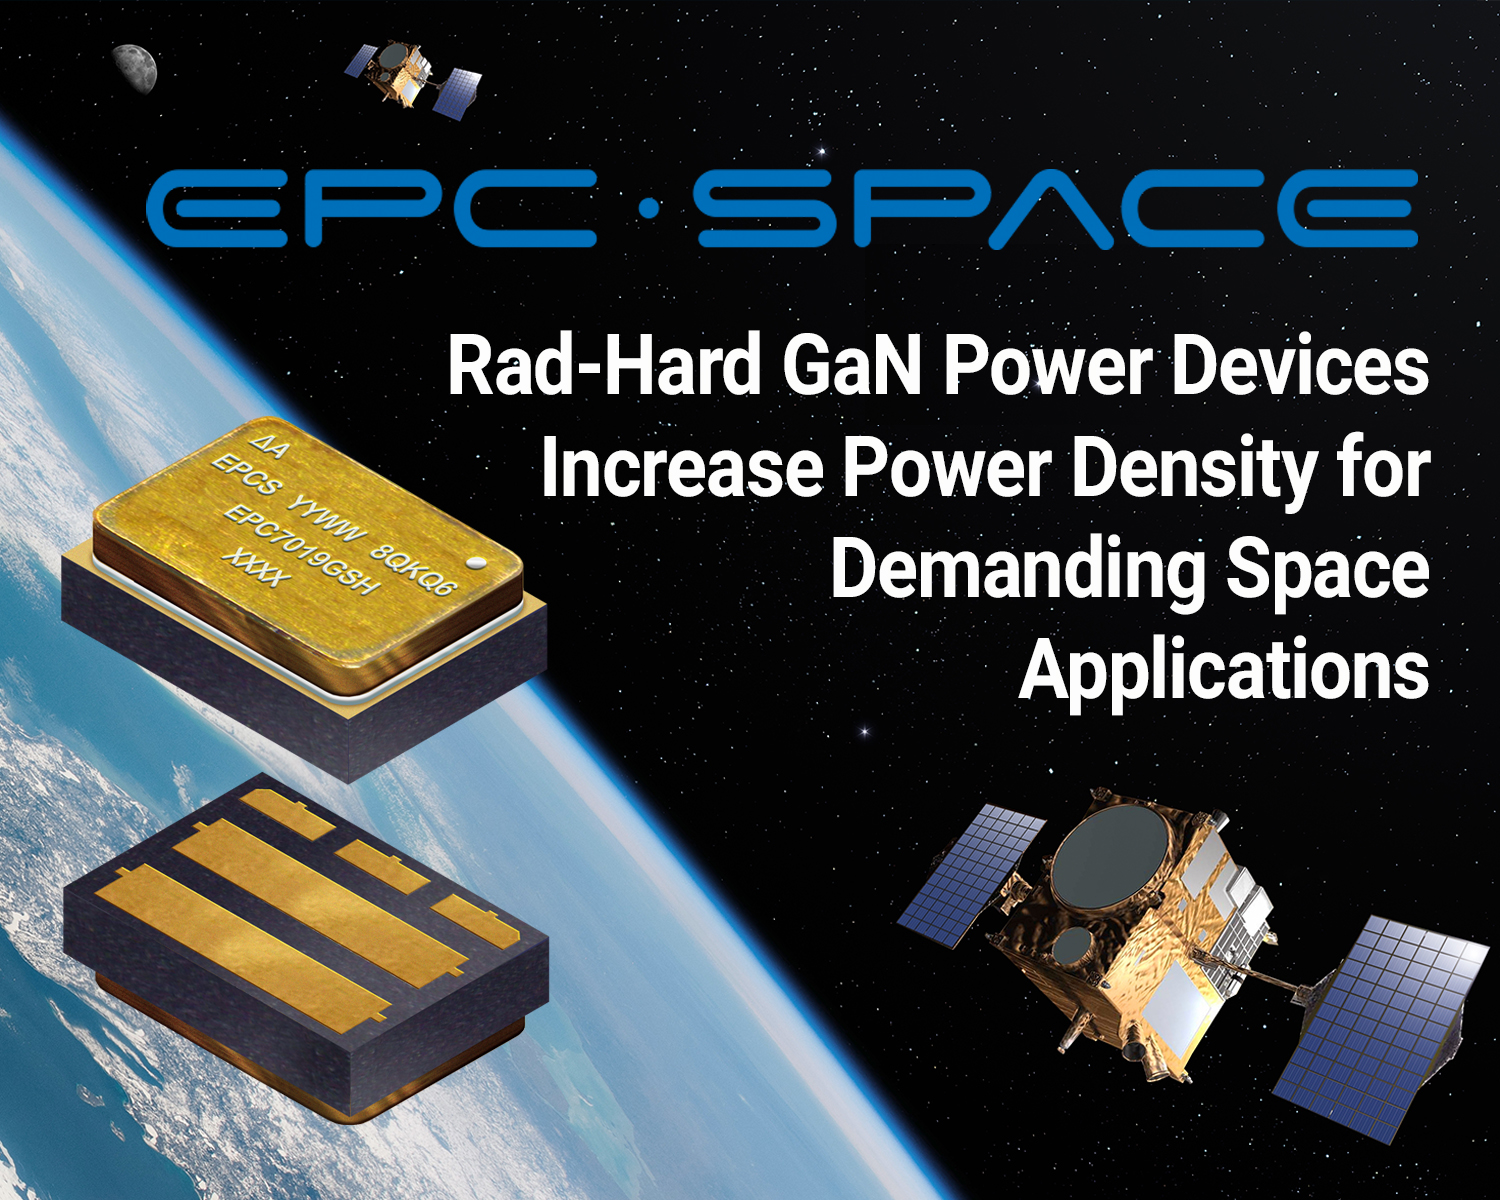 High Current 200 V and 300 V Rad-Hard GaN Power Devices Increase Power Density for Demanding Space Applications